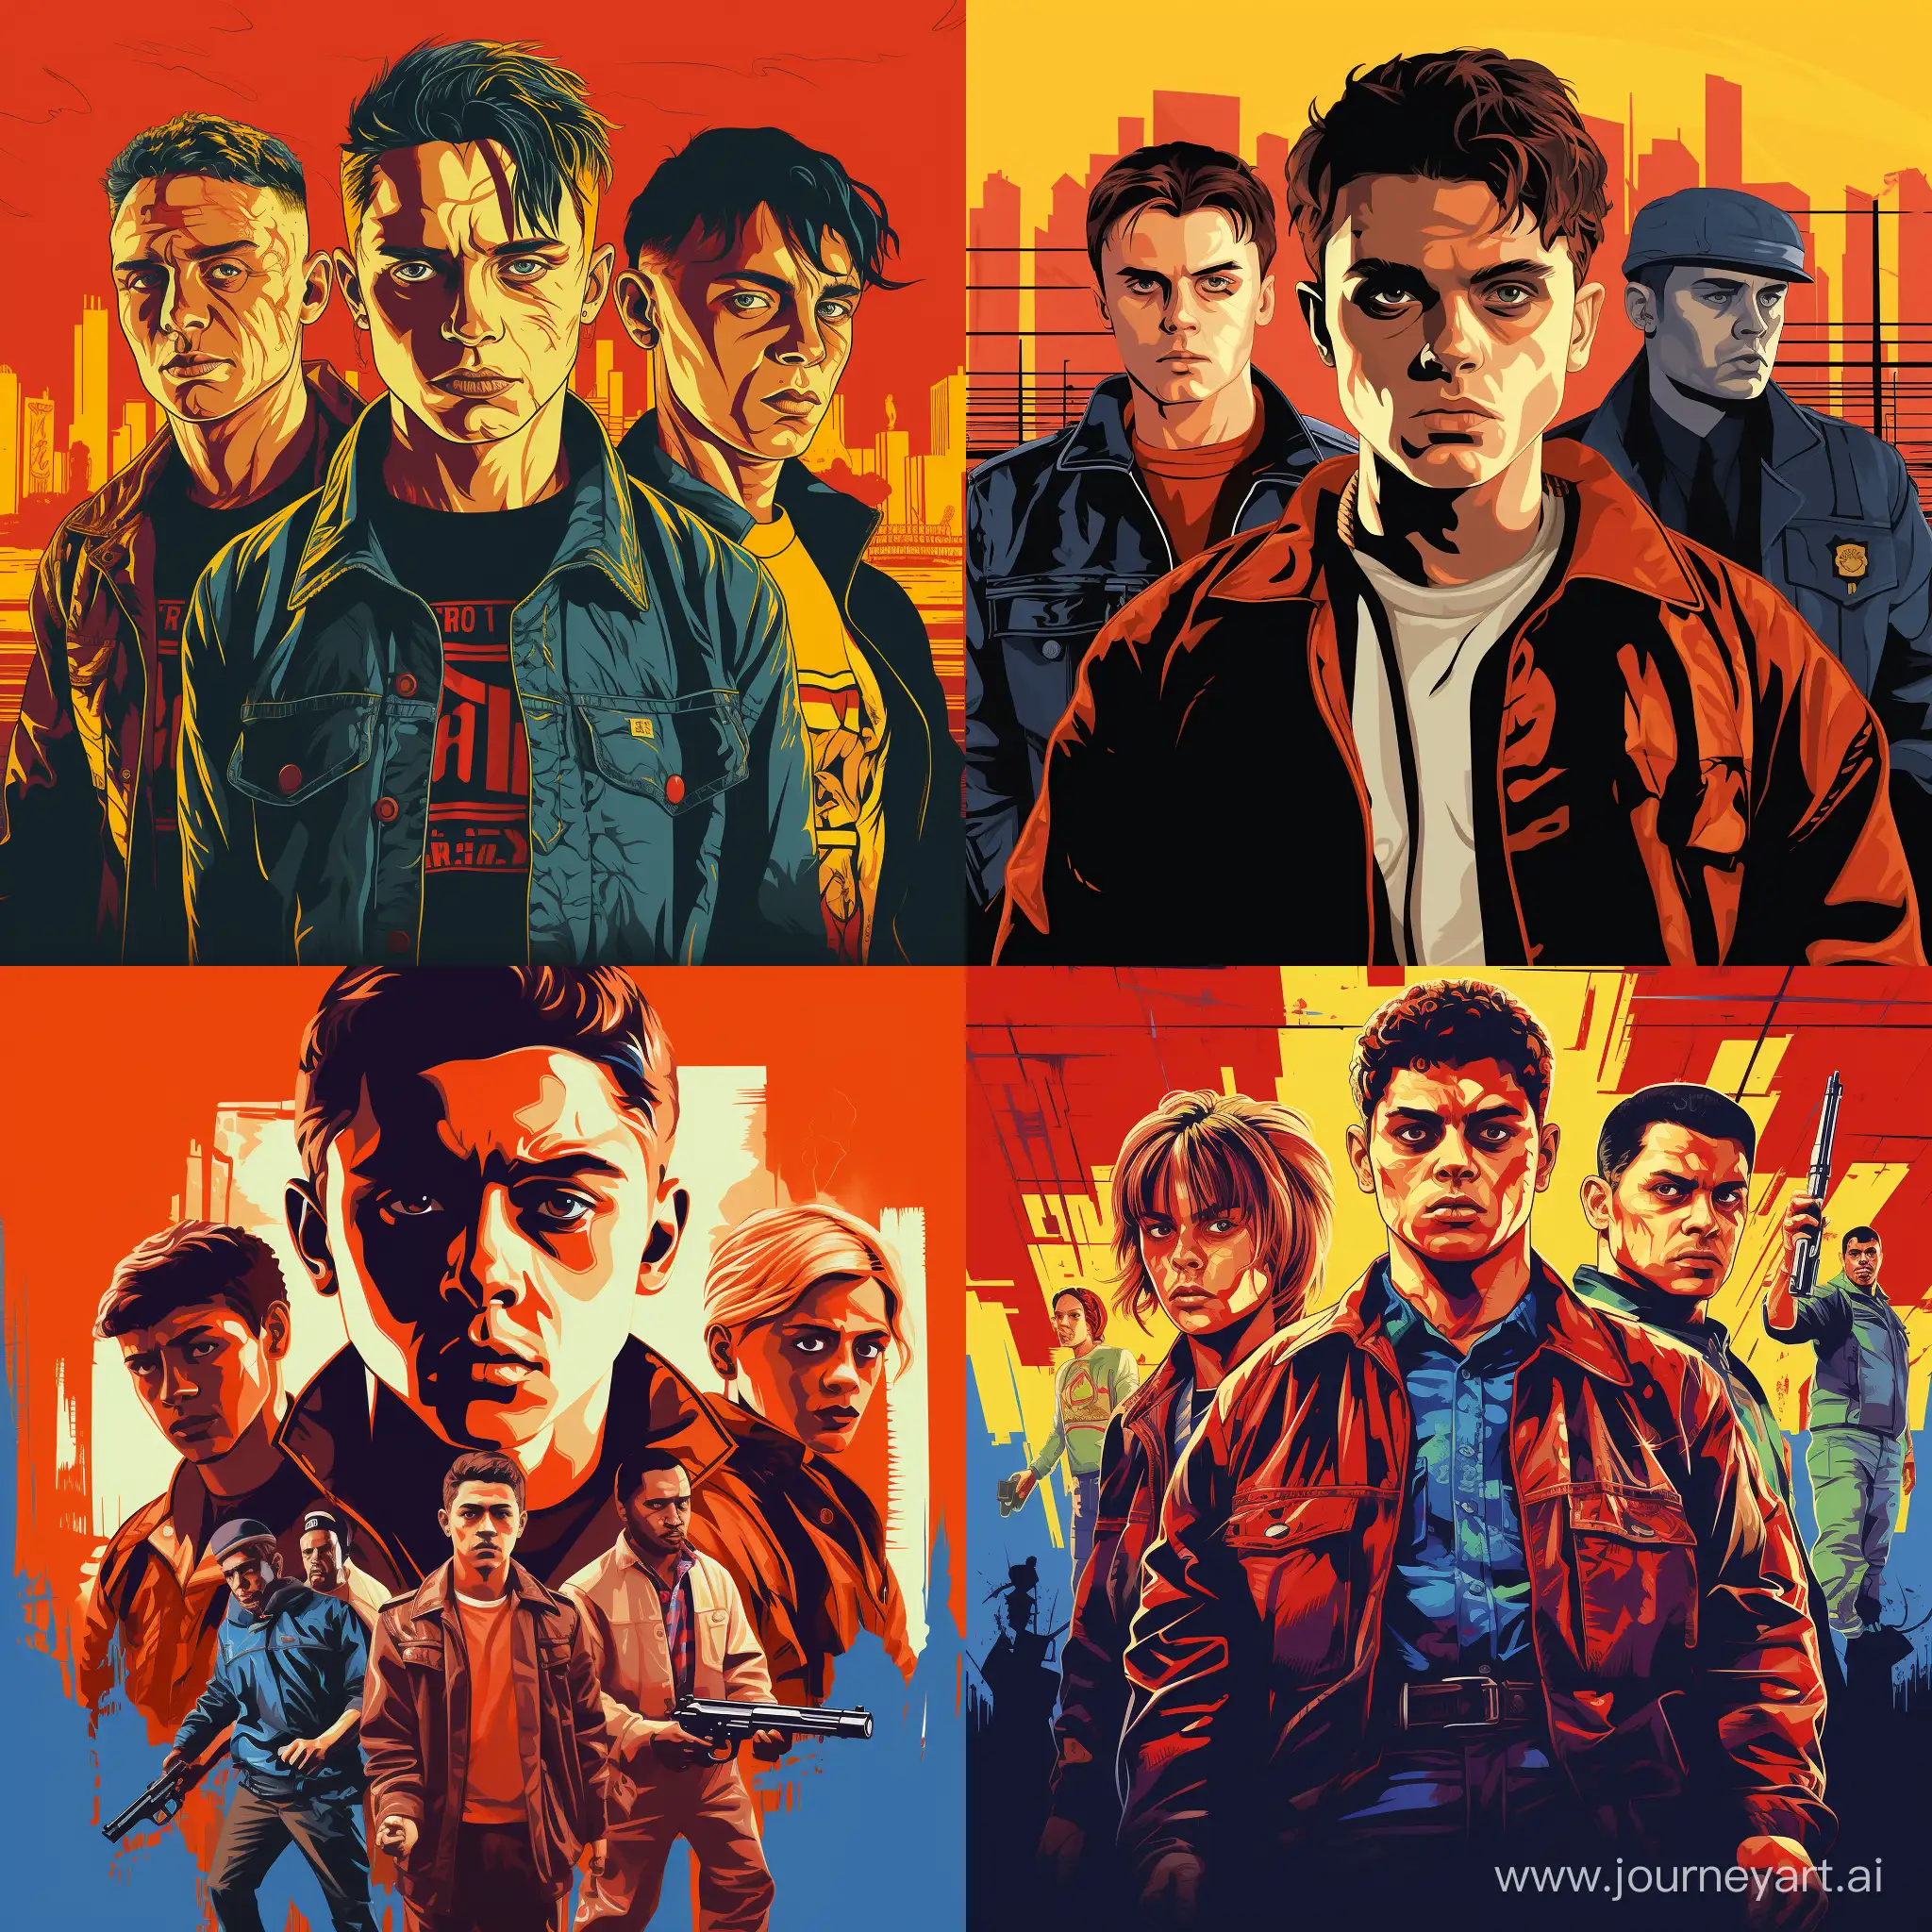 Soviet-Teenage-Gangsters-Confront-Police-in-Pop-Art-Style-Crime-Film-Poster